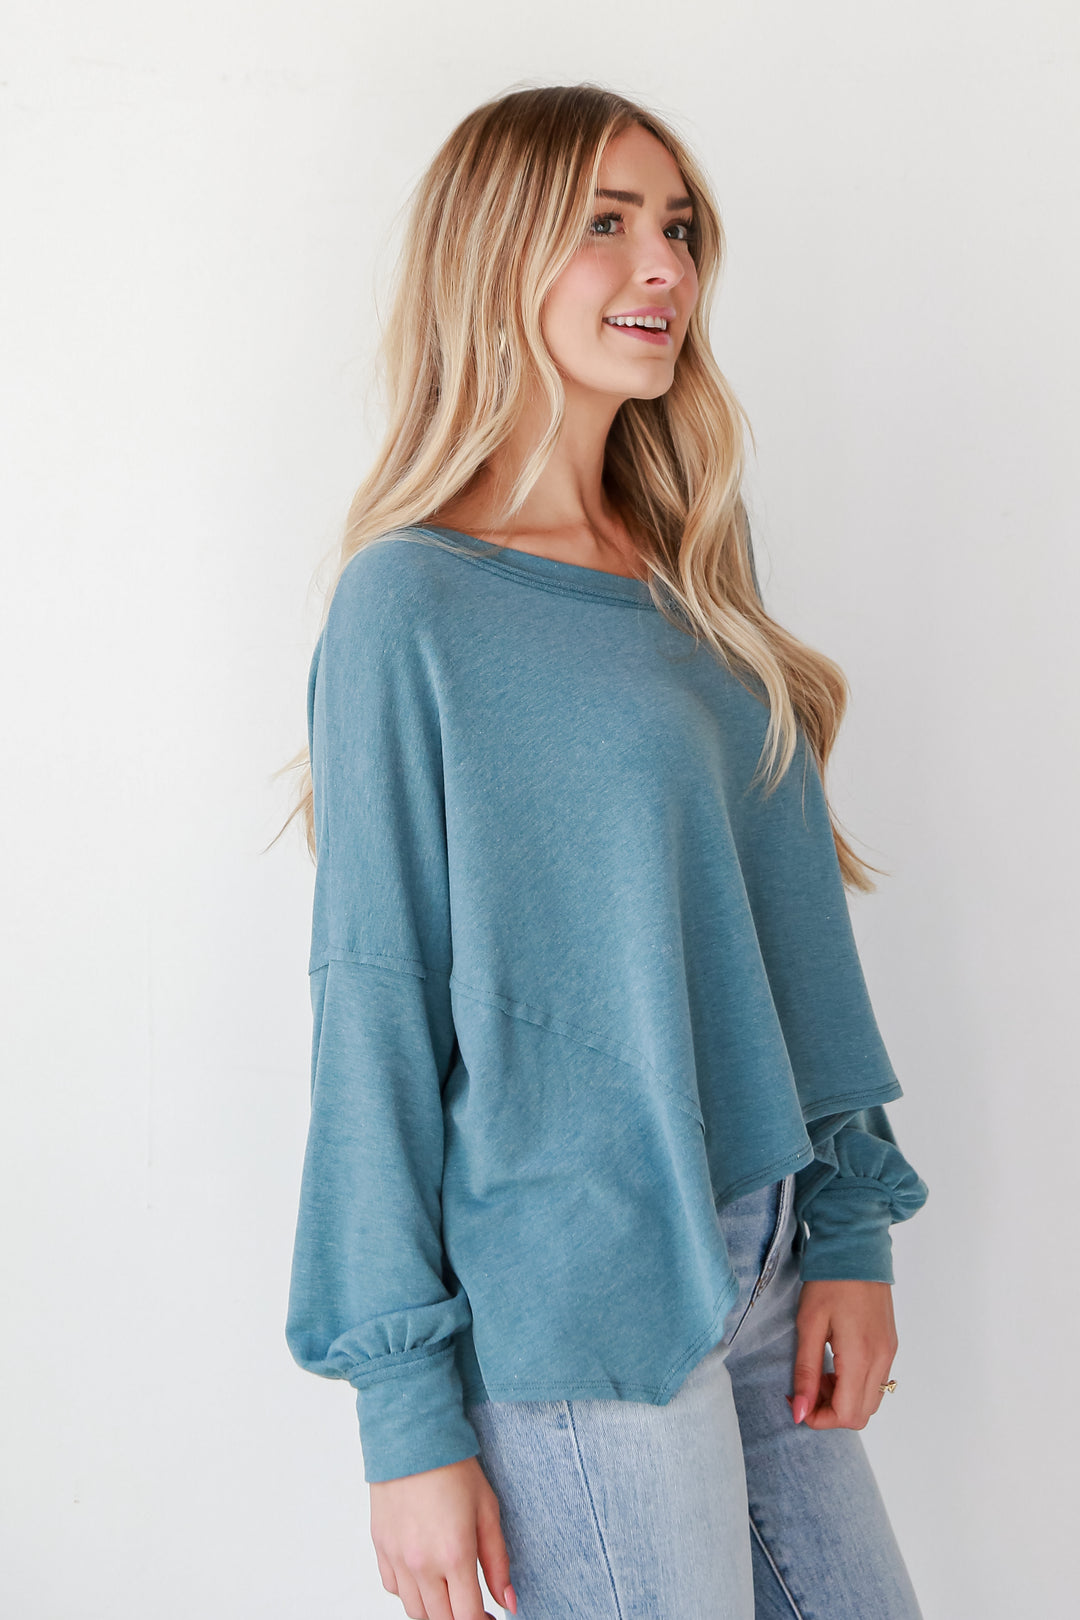 blue Oversized Knit Top side view